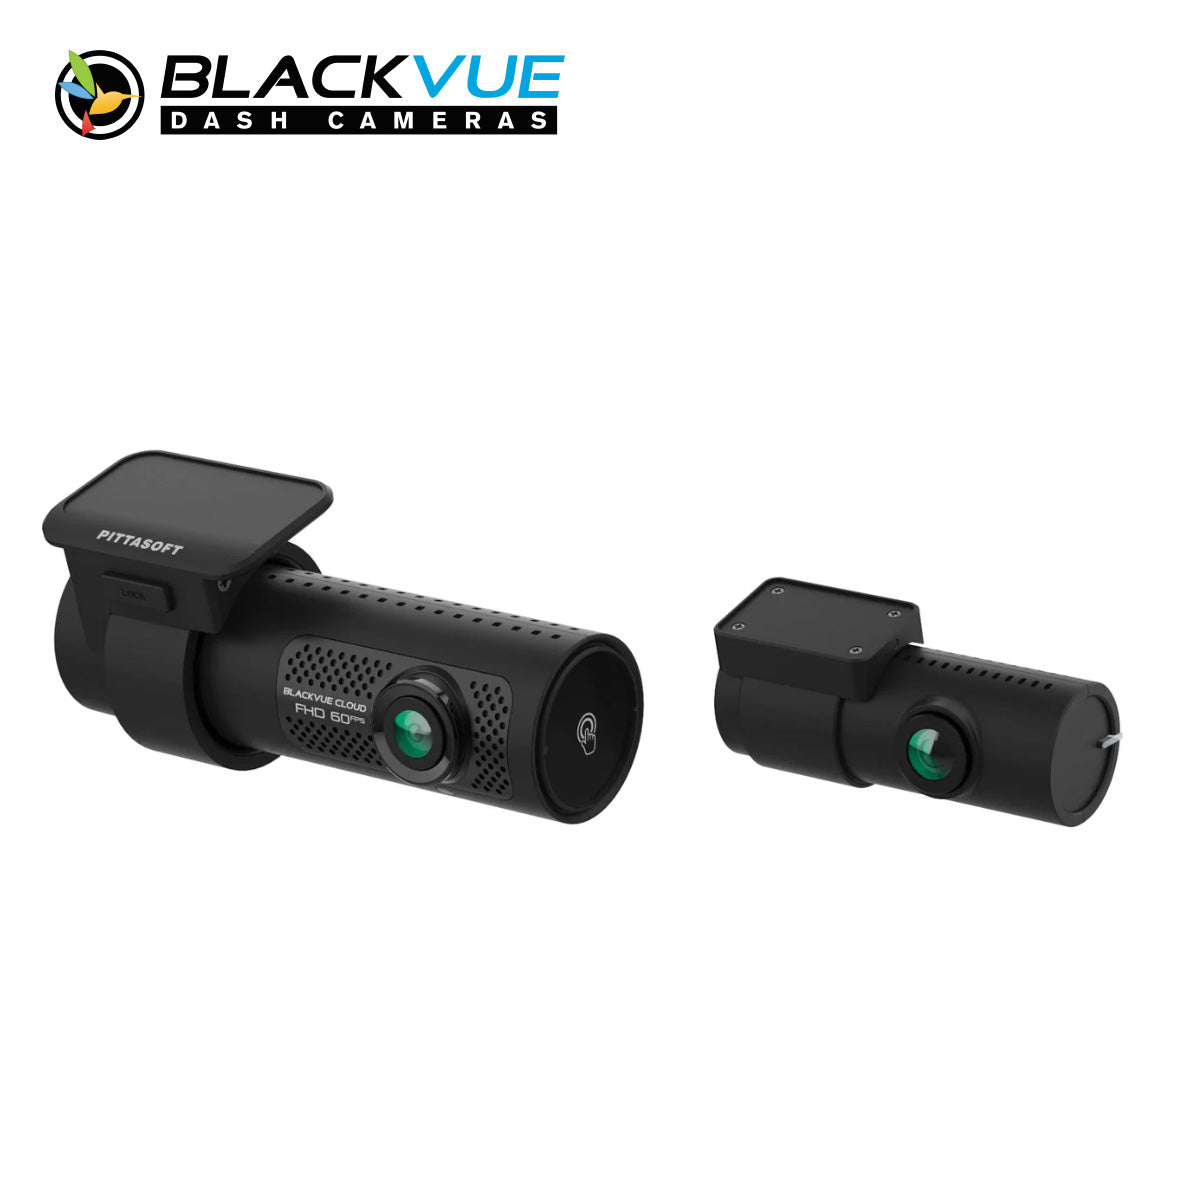  BlackVue DR900X-2CH with 32GB microSD Card, 4K UHD Cloud front  Dashcam, Built-in Wi-Fi, GPS, Parking Mode Voltage Monitor